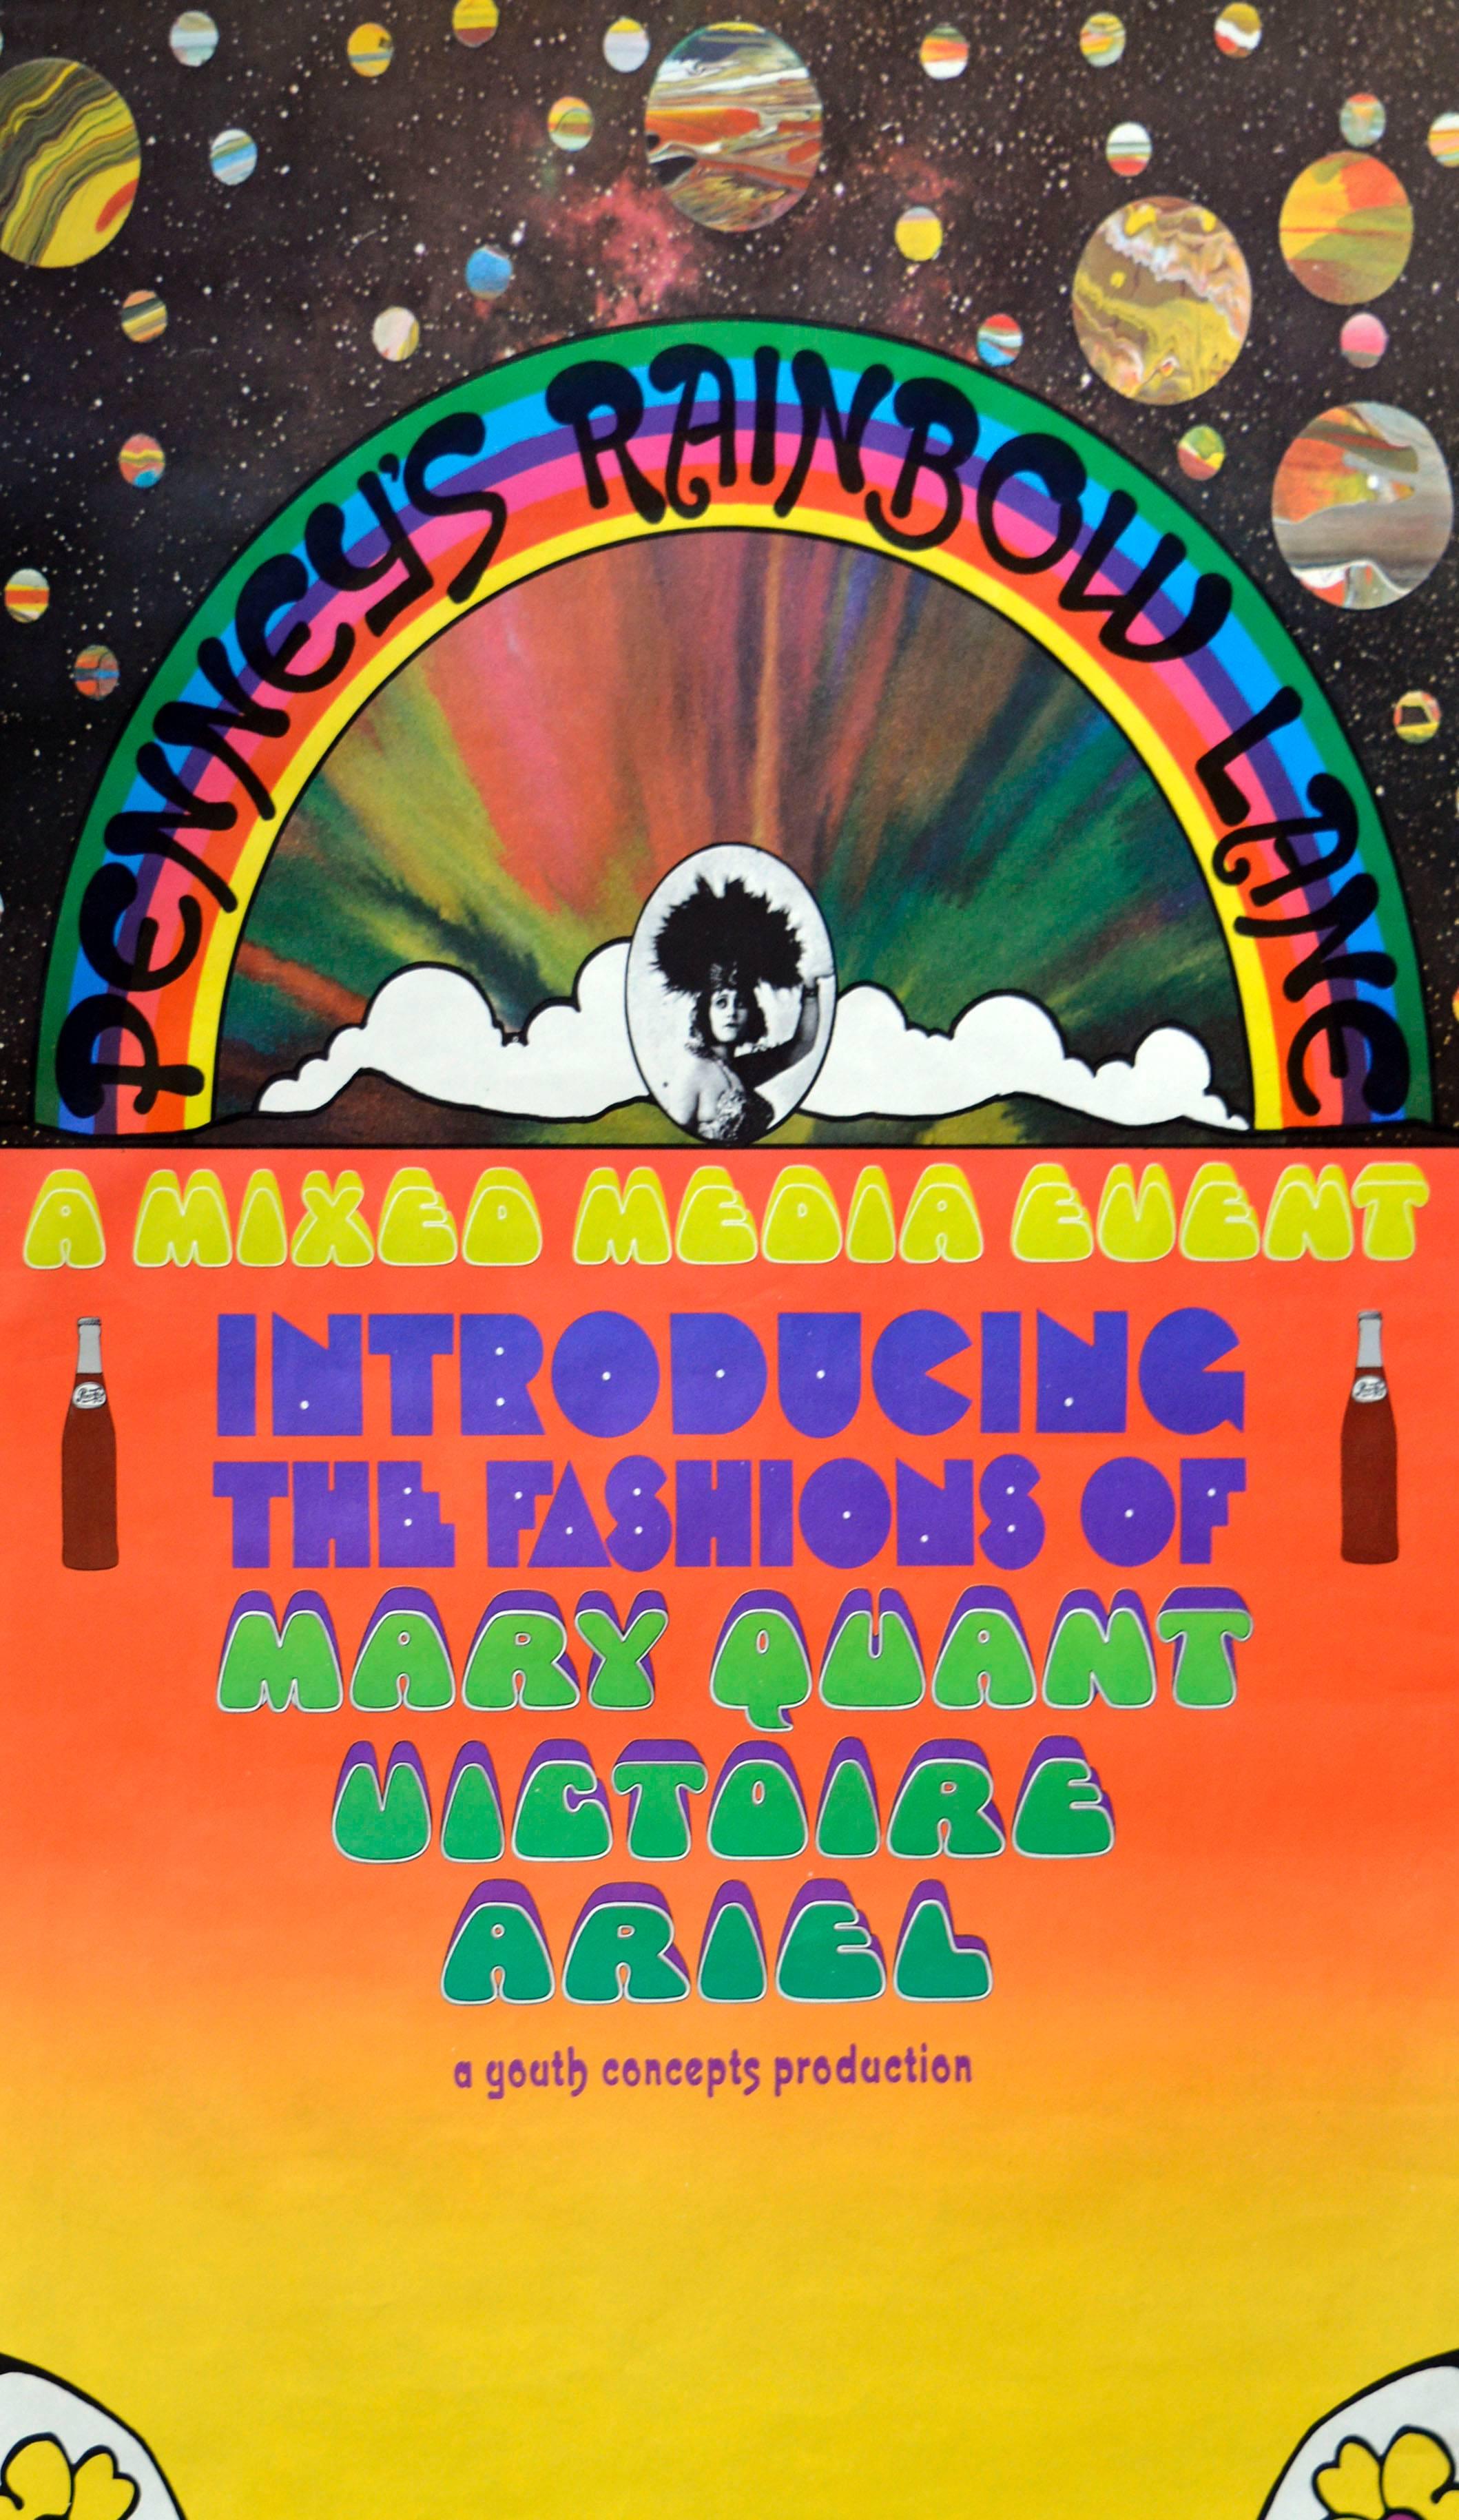 Penny's Rainbow Lane - Vintage 1960's Abstract Psychedelic Pop Art Poster  - Print by Peter Max